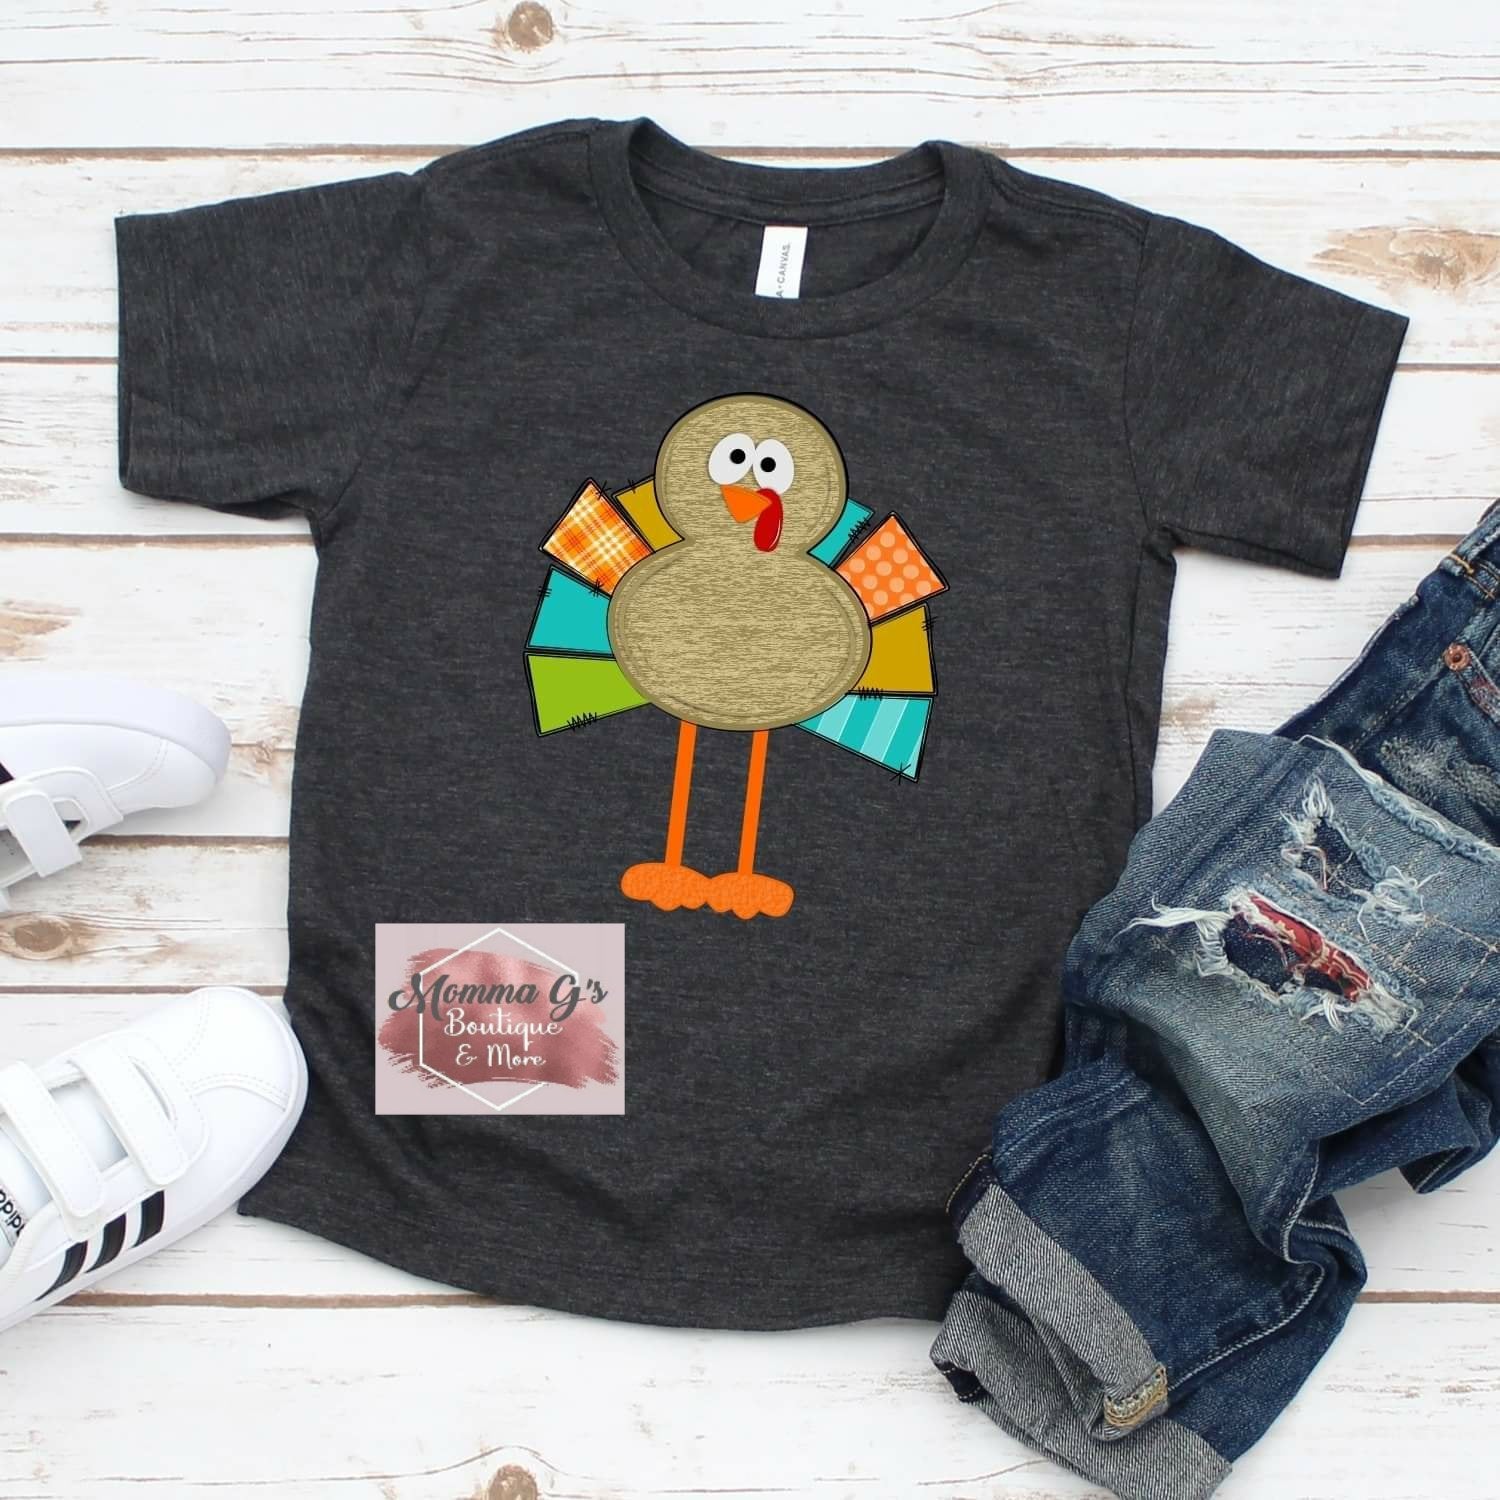 Standing Turkey T-shirt for Boy and Dad - Momma G's Children's Boutique, Screen Printing, Embroidery & More